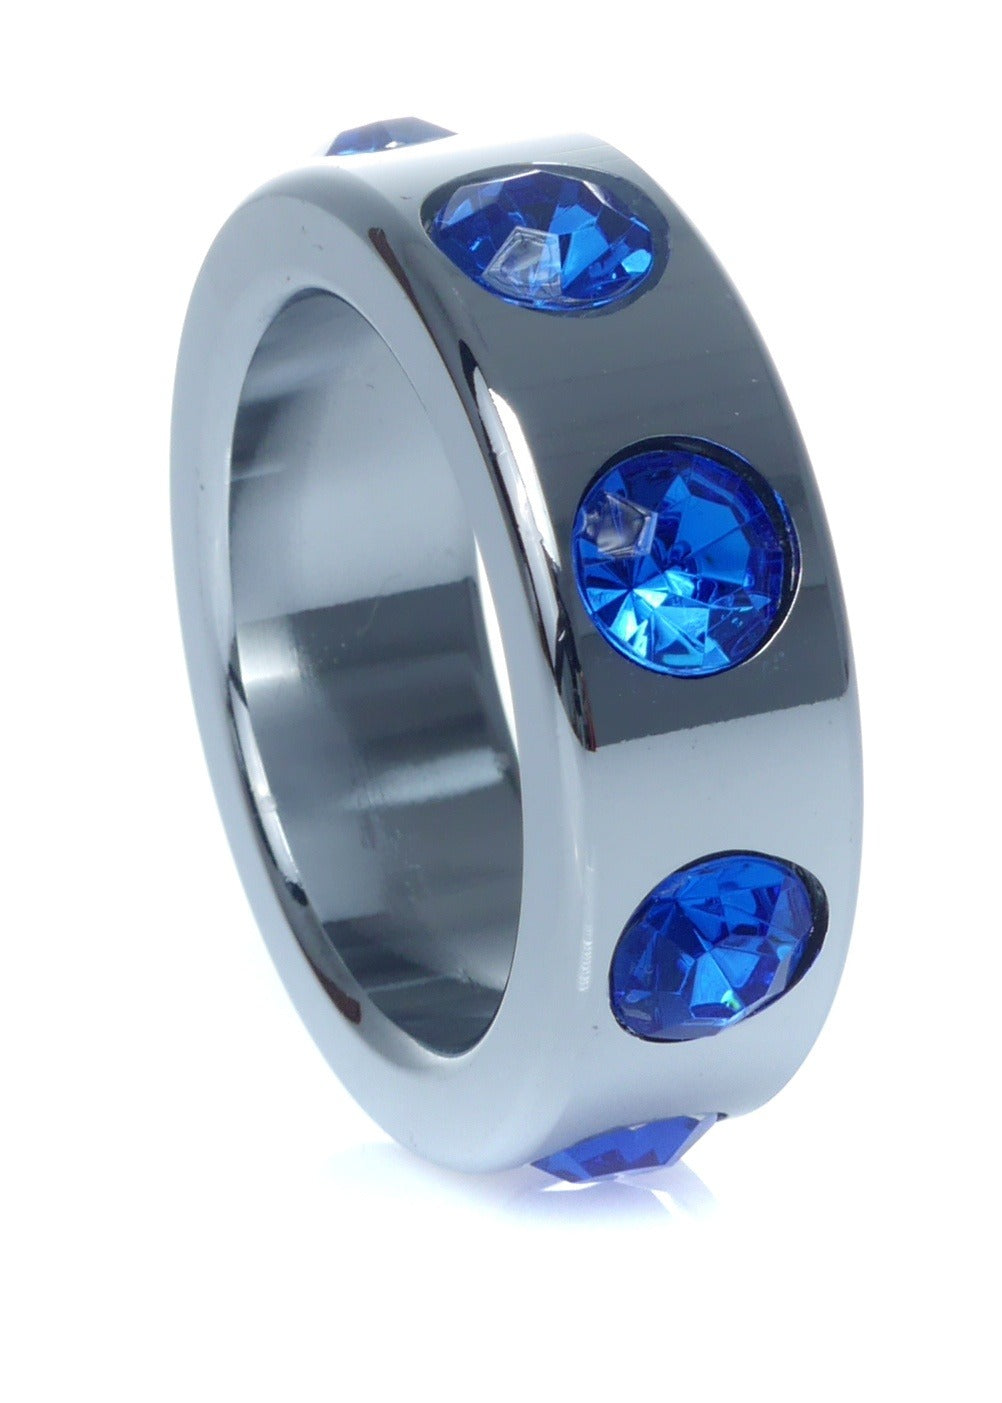 Bossoftoys - 64-00118 - Stainless steel - Metal Cockring  - with Blue Diamond stones - Small size - inner dia 3,5 CM - outer dia 4,5 CM